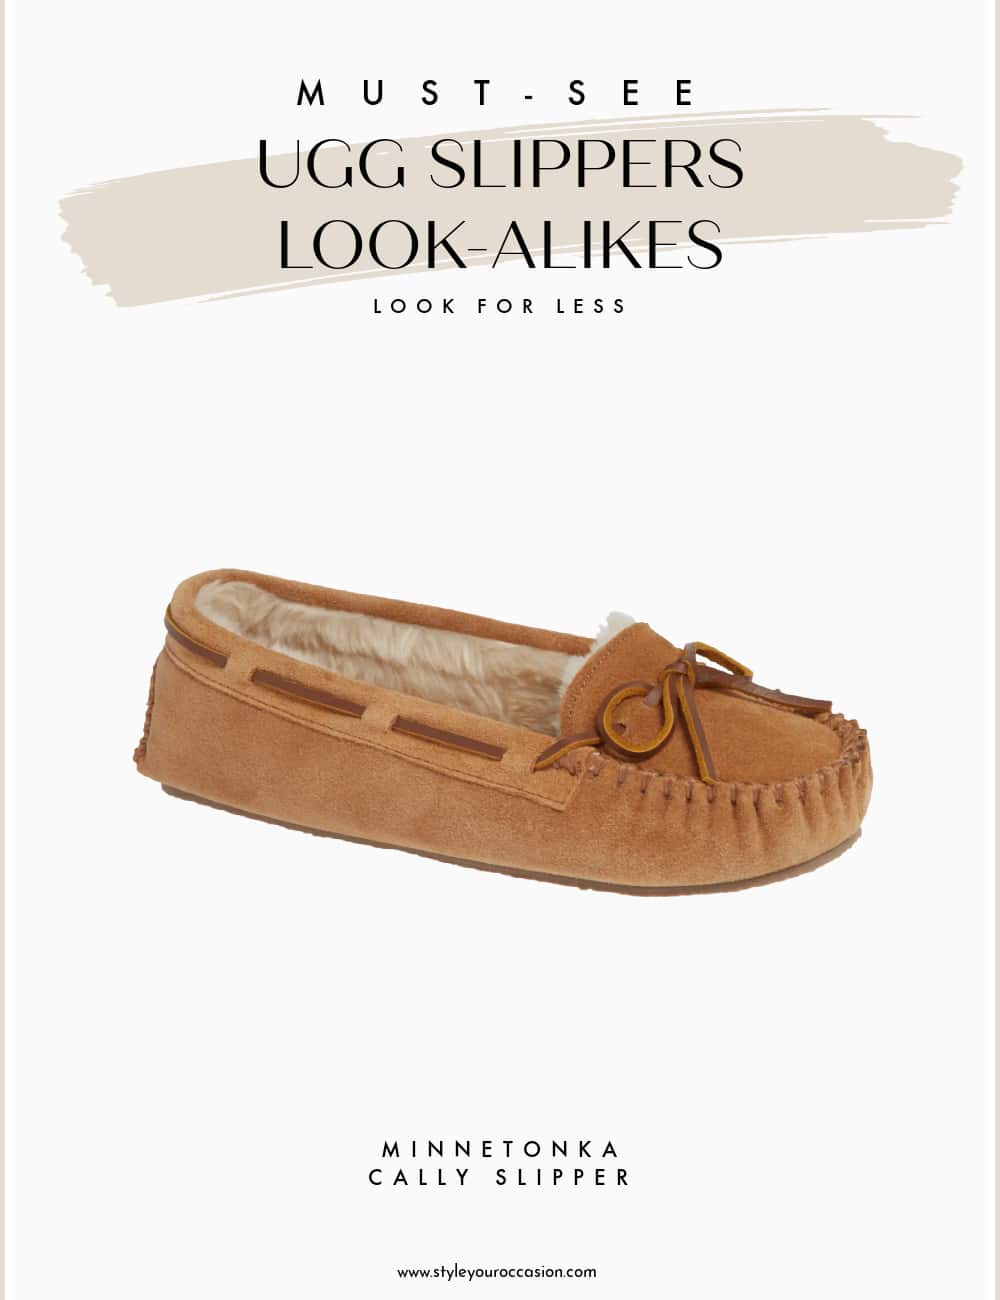 An image board of the Cally slippers from Minnetonka as a dupe for Ugg Dakota slippers